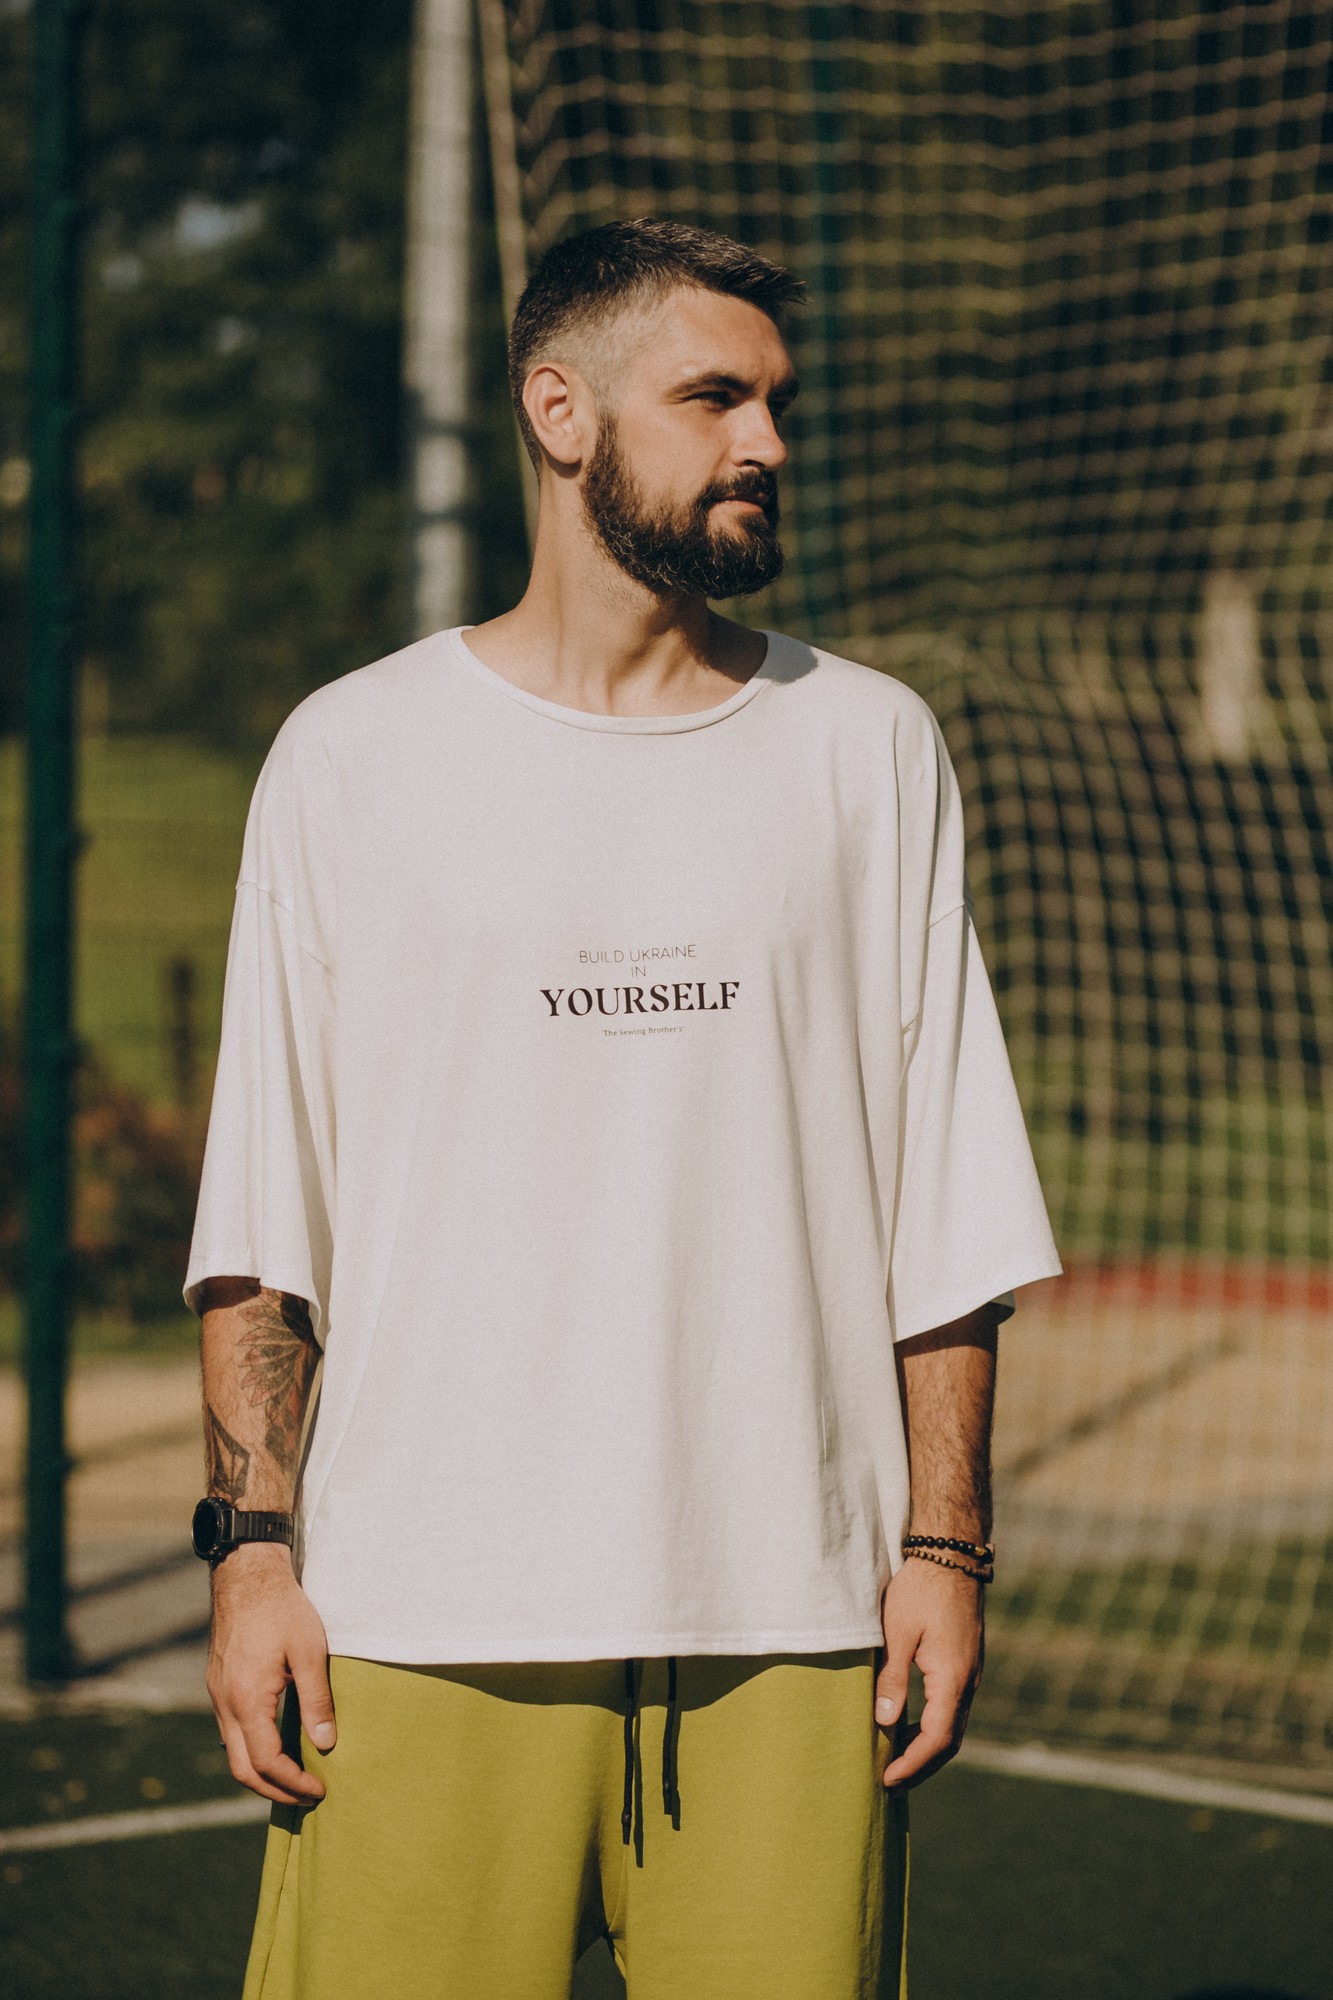 shorts and t-shirt Build Ukraine in yourself white and olive